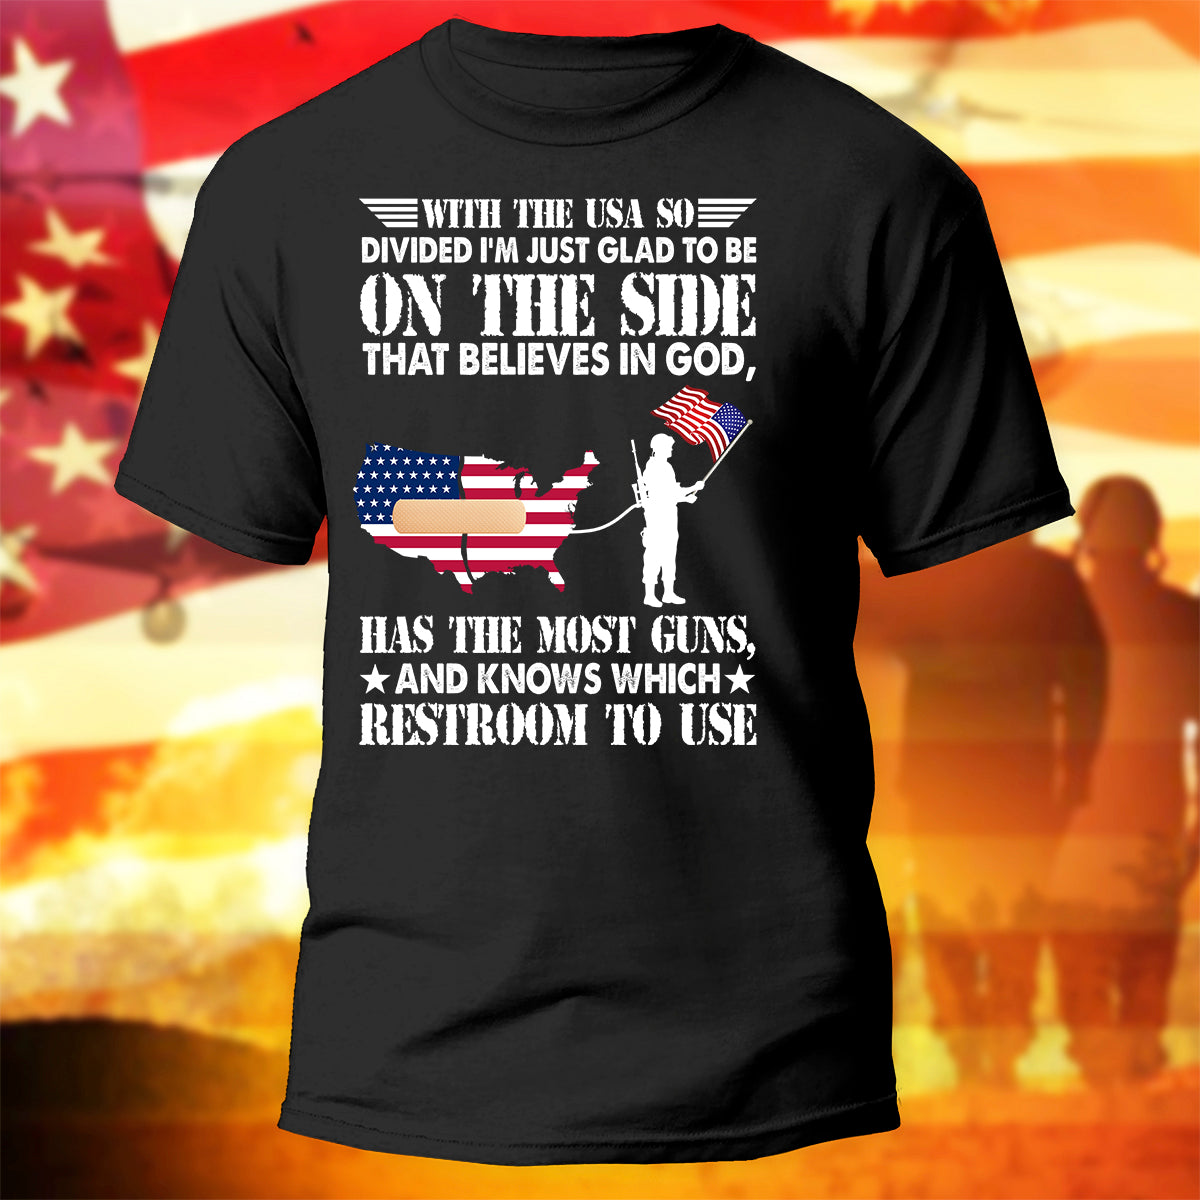 Liberty American Flag T-Shirt I'm Just Glad To Be On The Side Shirt Patriotic Gift